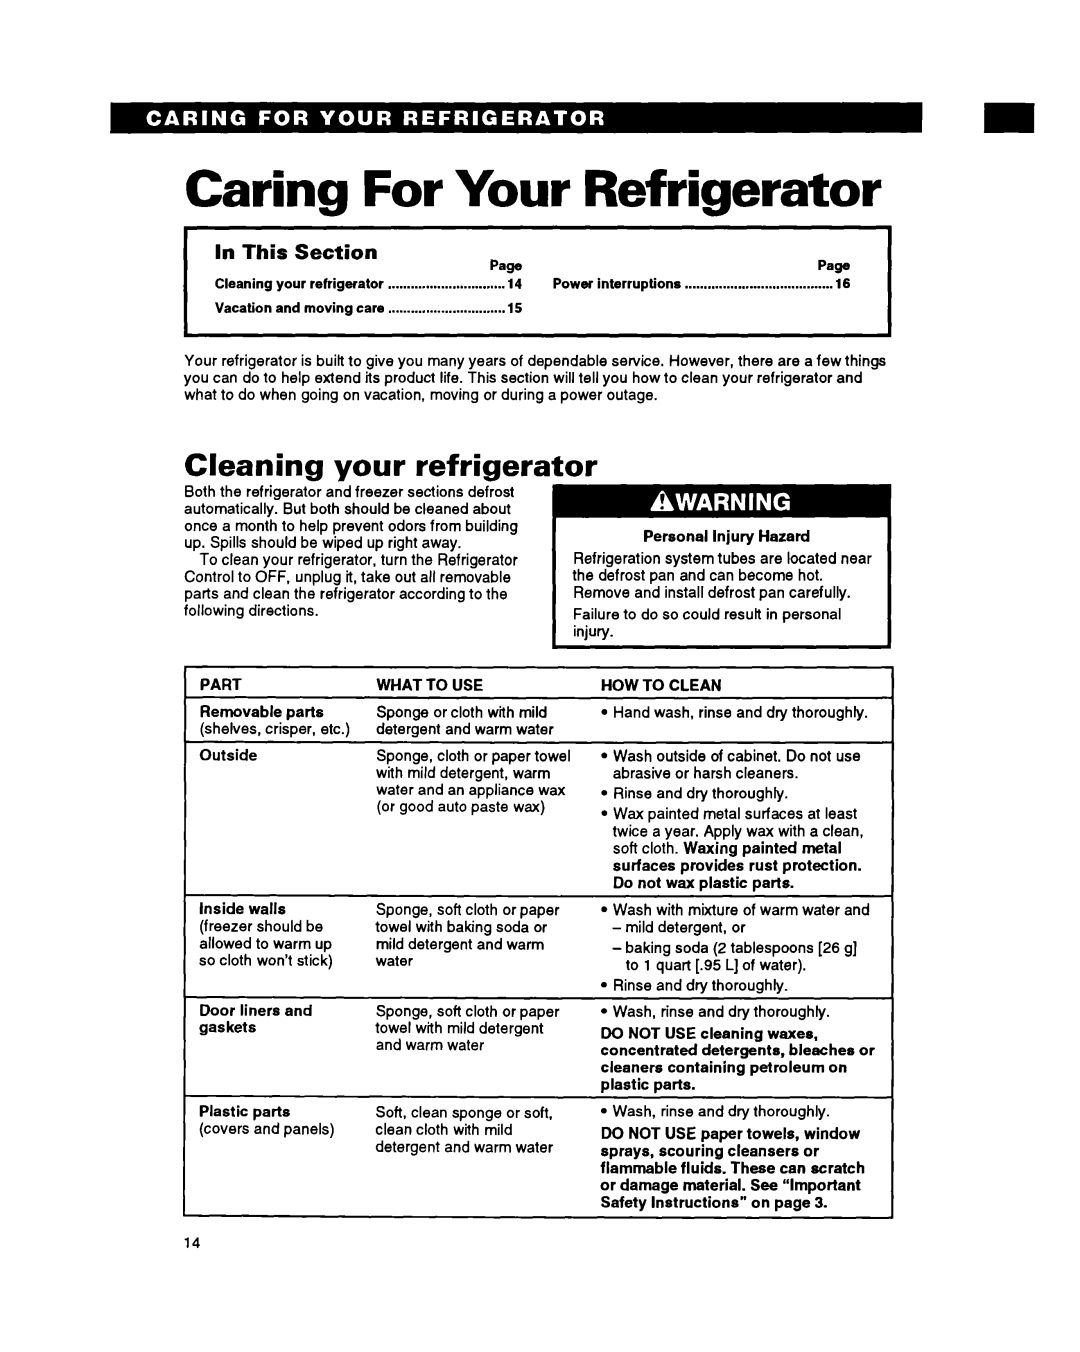 Whirlpool RBZICK Caring For Your Refrigerator, Cleaning your refrigerator, In This, Section, Page 